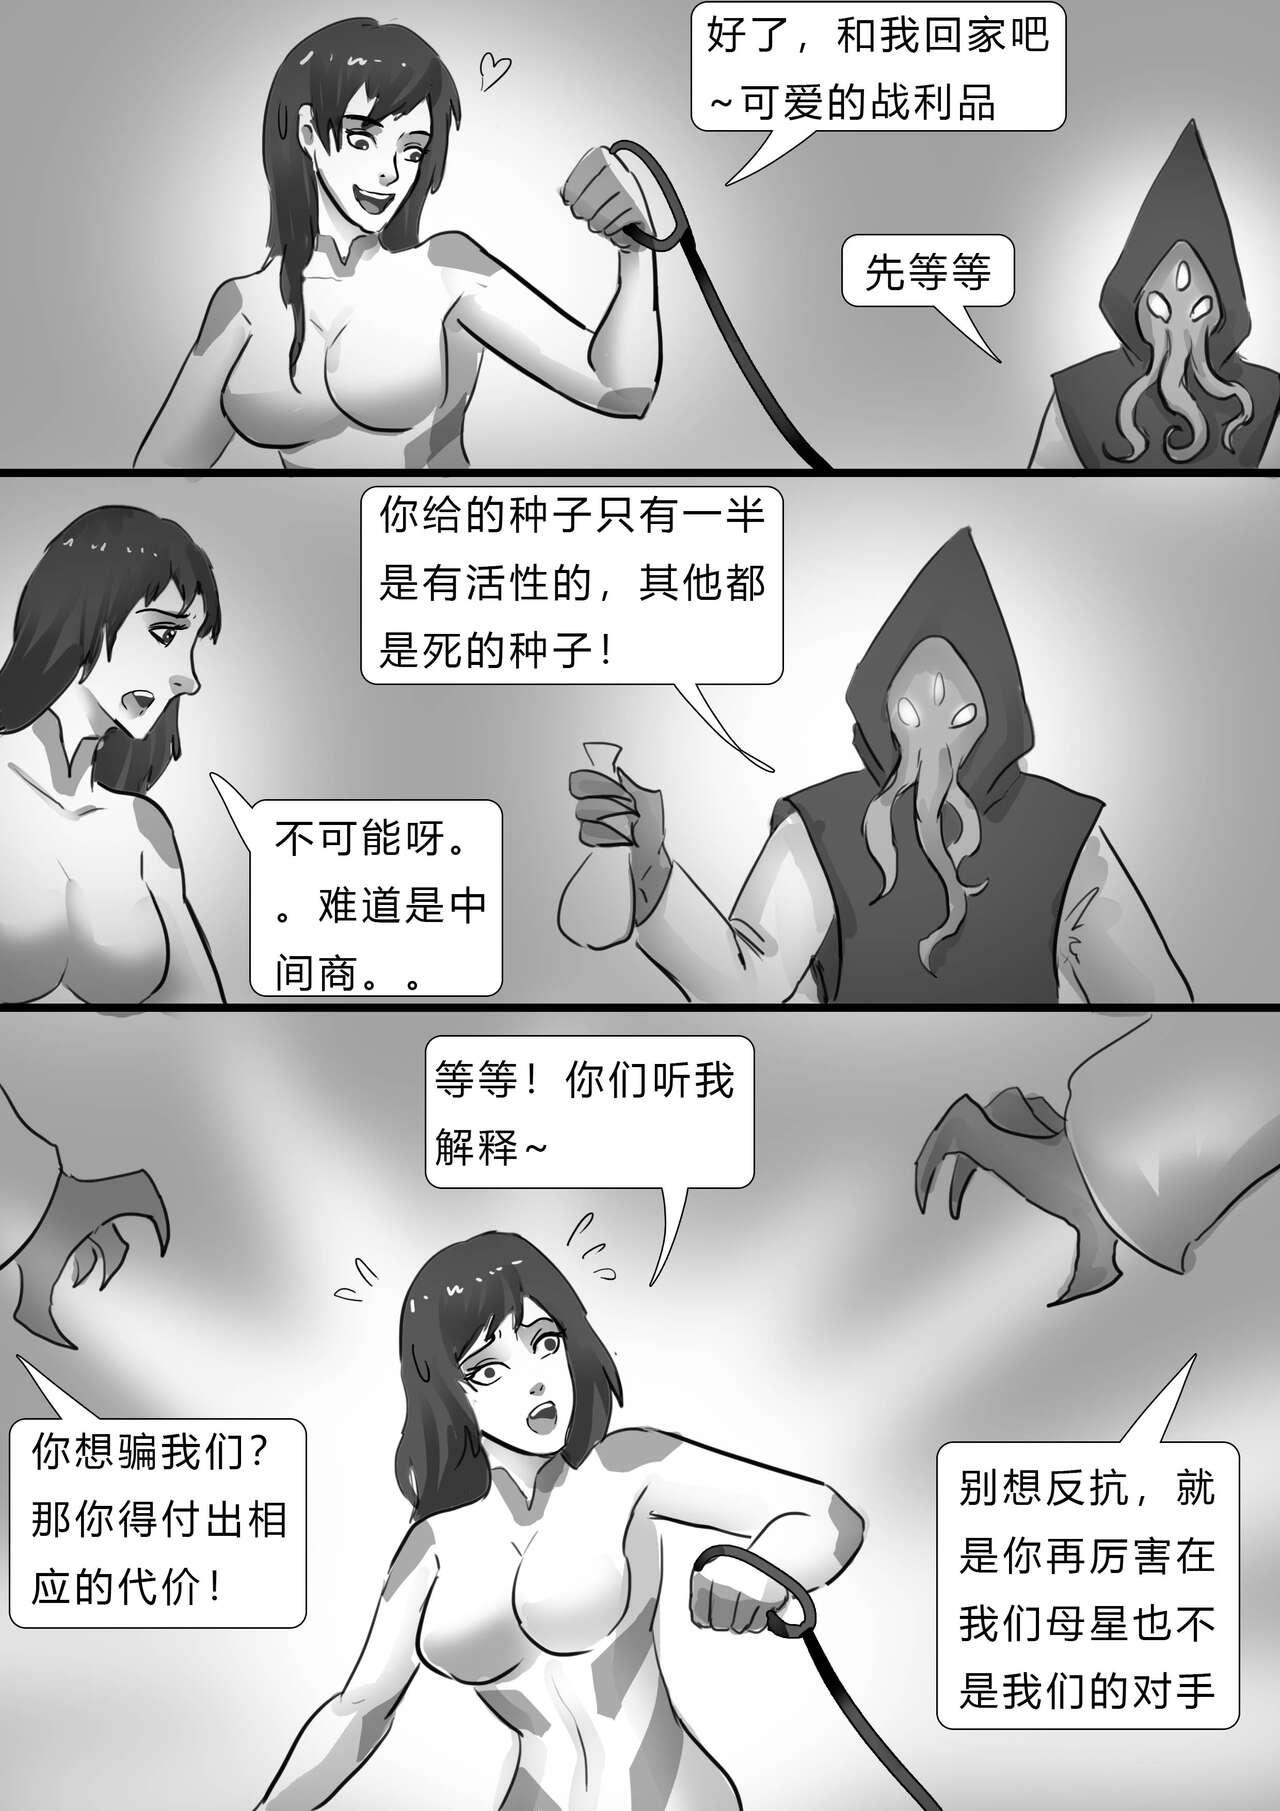 Style 千变女奴 Thousand-change slave girl Audition - Page 15